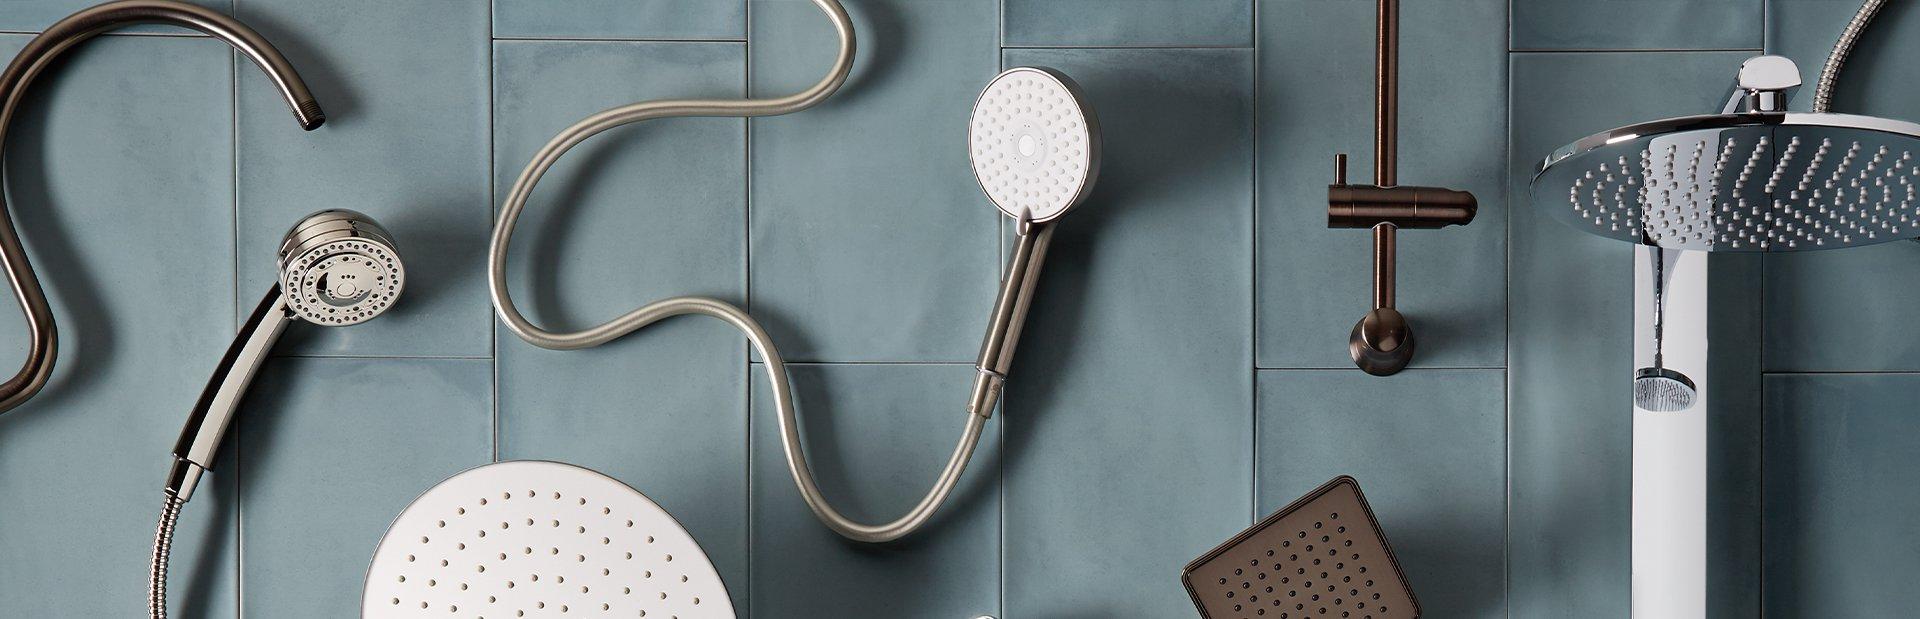 flat lay of various shower heads and other bathroom hardware